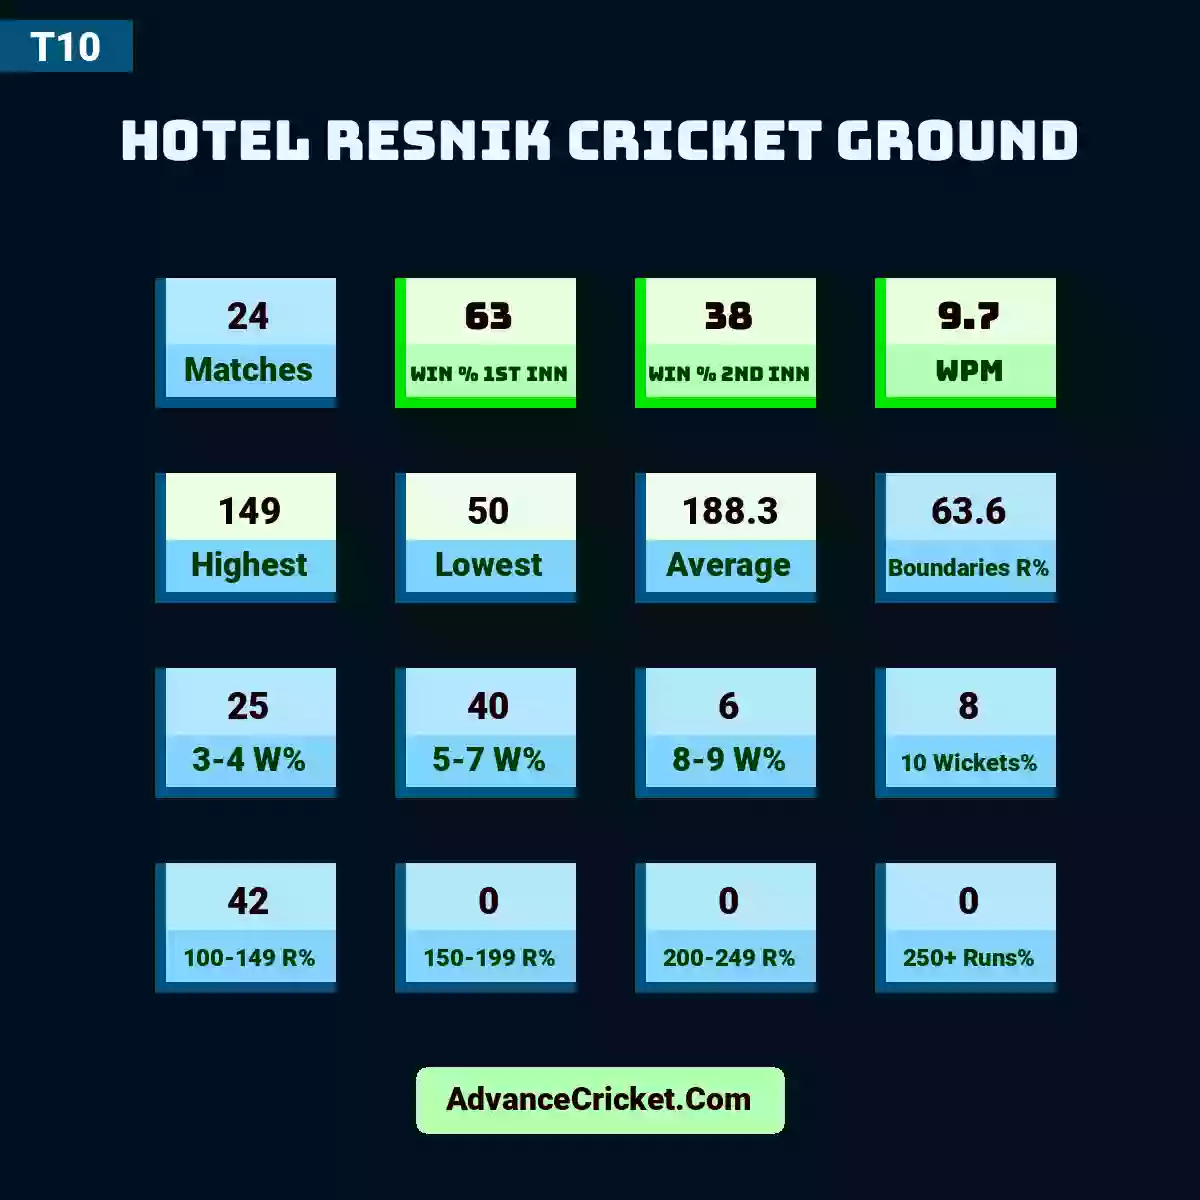 Image showing Hotel Resnik Cricket Ground with Matches: 24, Win % 1st Inn: 63, Win % 2nd Inn: 38, WPM: 9.7, Highest: 149, Lowest: 50, Average: 188.3, Boundaries R%: 63.6, 3-4 W%: 25, 5-7 W%: 40, 8-9 W%: 6, 10 Wickets%: 8, 100-149 R%: 42, 150-199 R%: 0, 200-249 R%: 0, 250+ Runs%: 0.